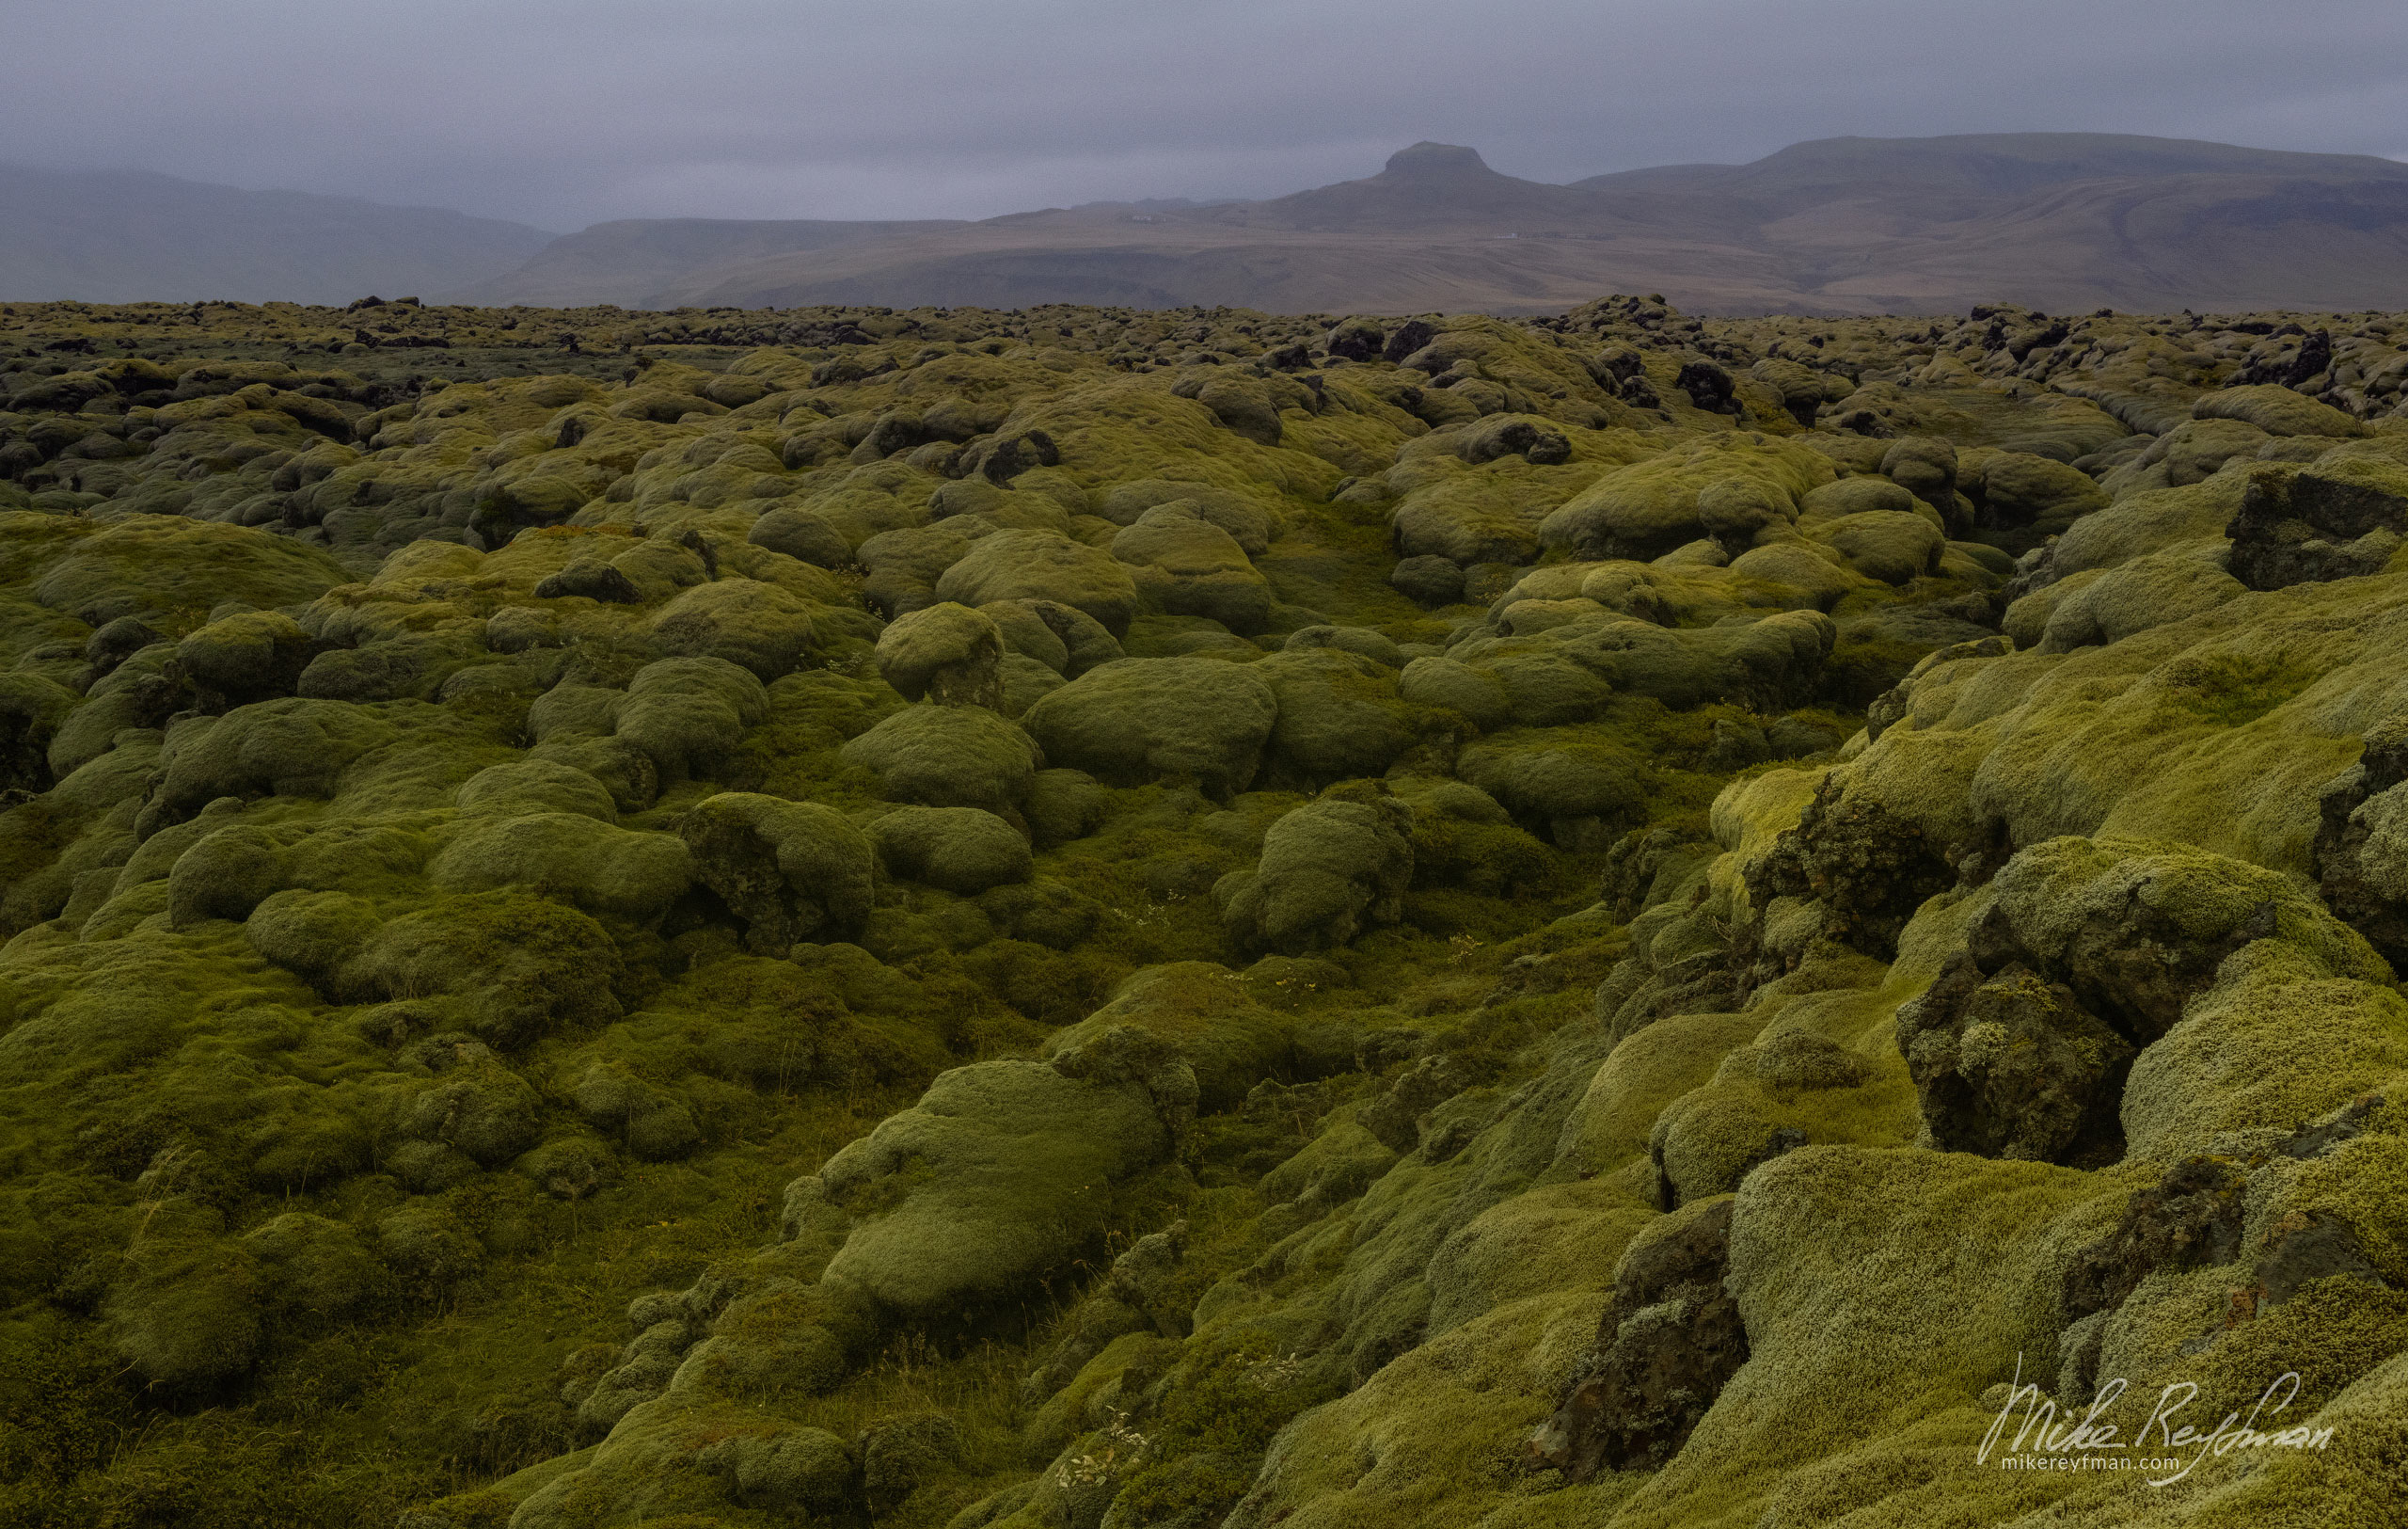 Lava covered in moss. Eldhraun Lava Field, South Iceland. 082-IC-GP _50B0131 - Rhyolite Mountains, Crater Lakes, Geothermal Areas, Lava Fields and Glacial Rivers. Iceland.  - Mike Reyfman Photography